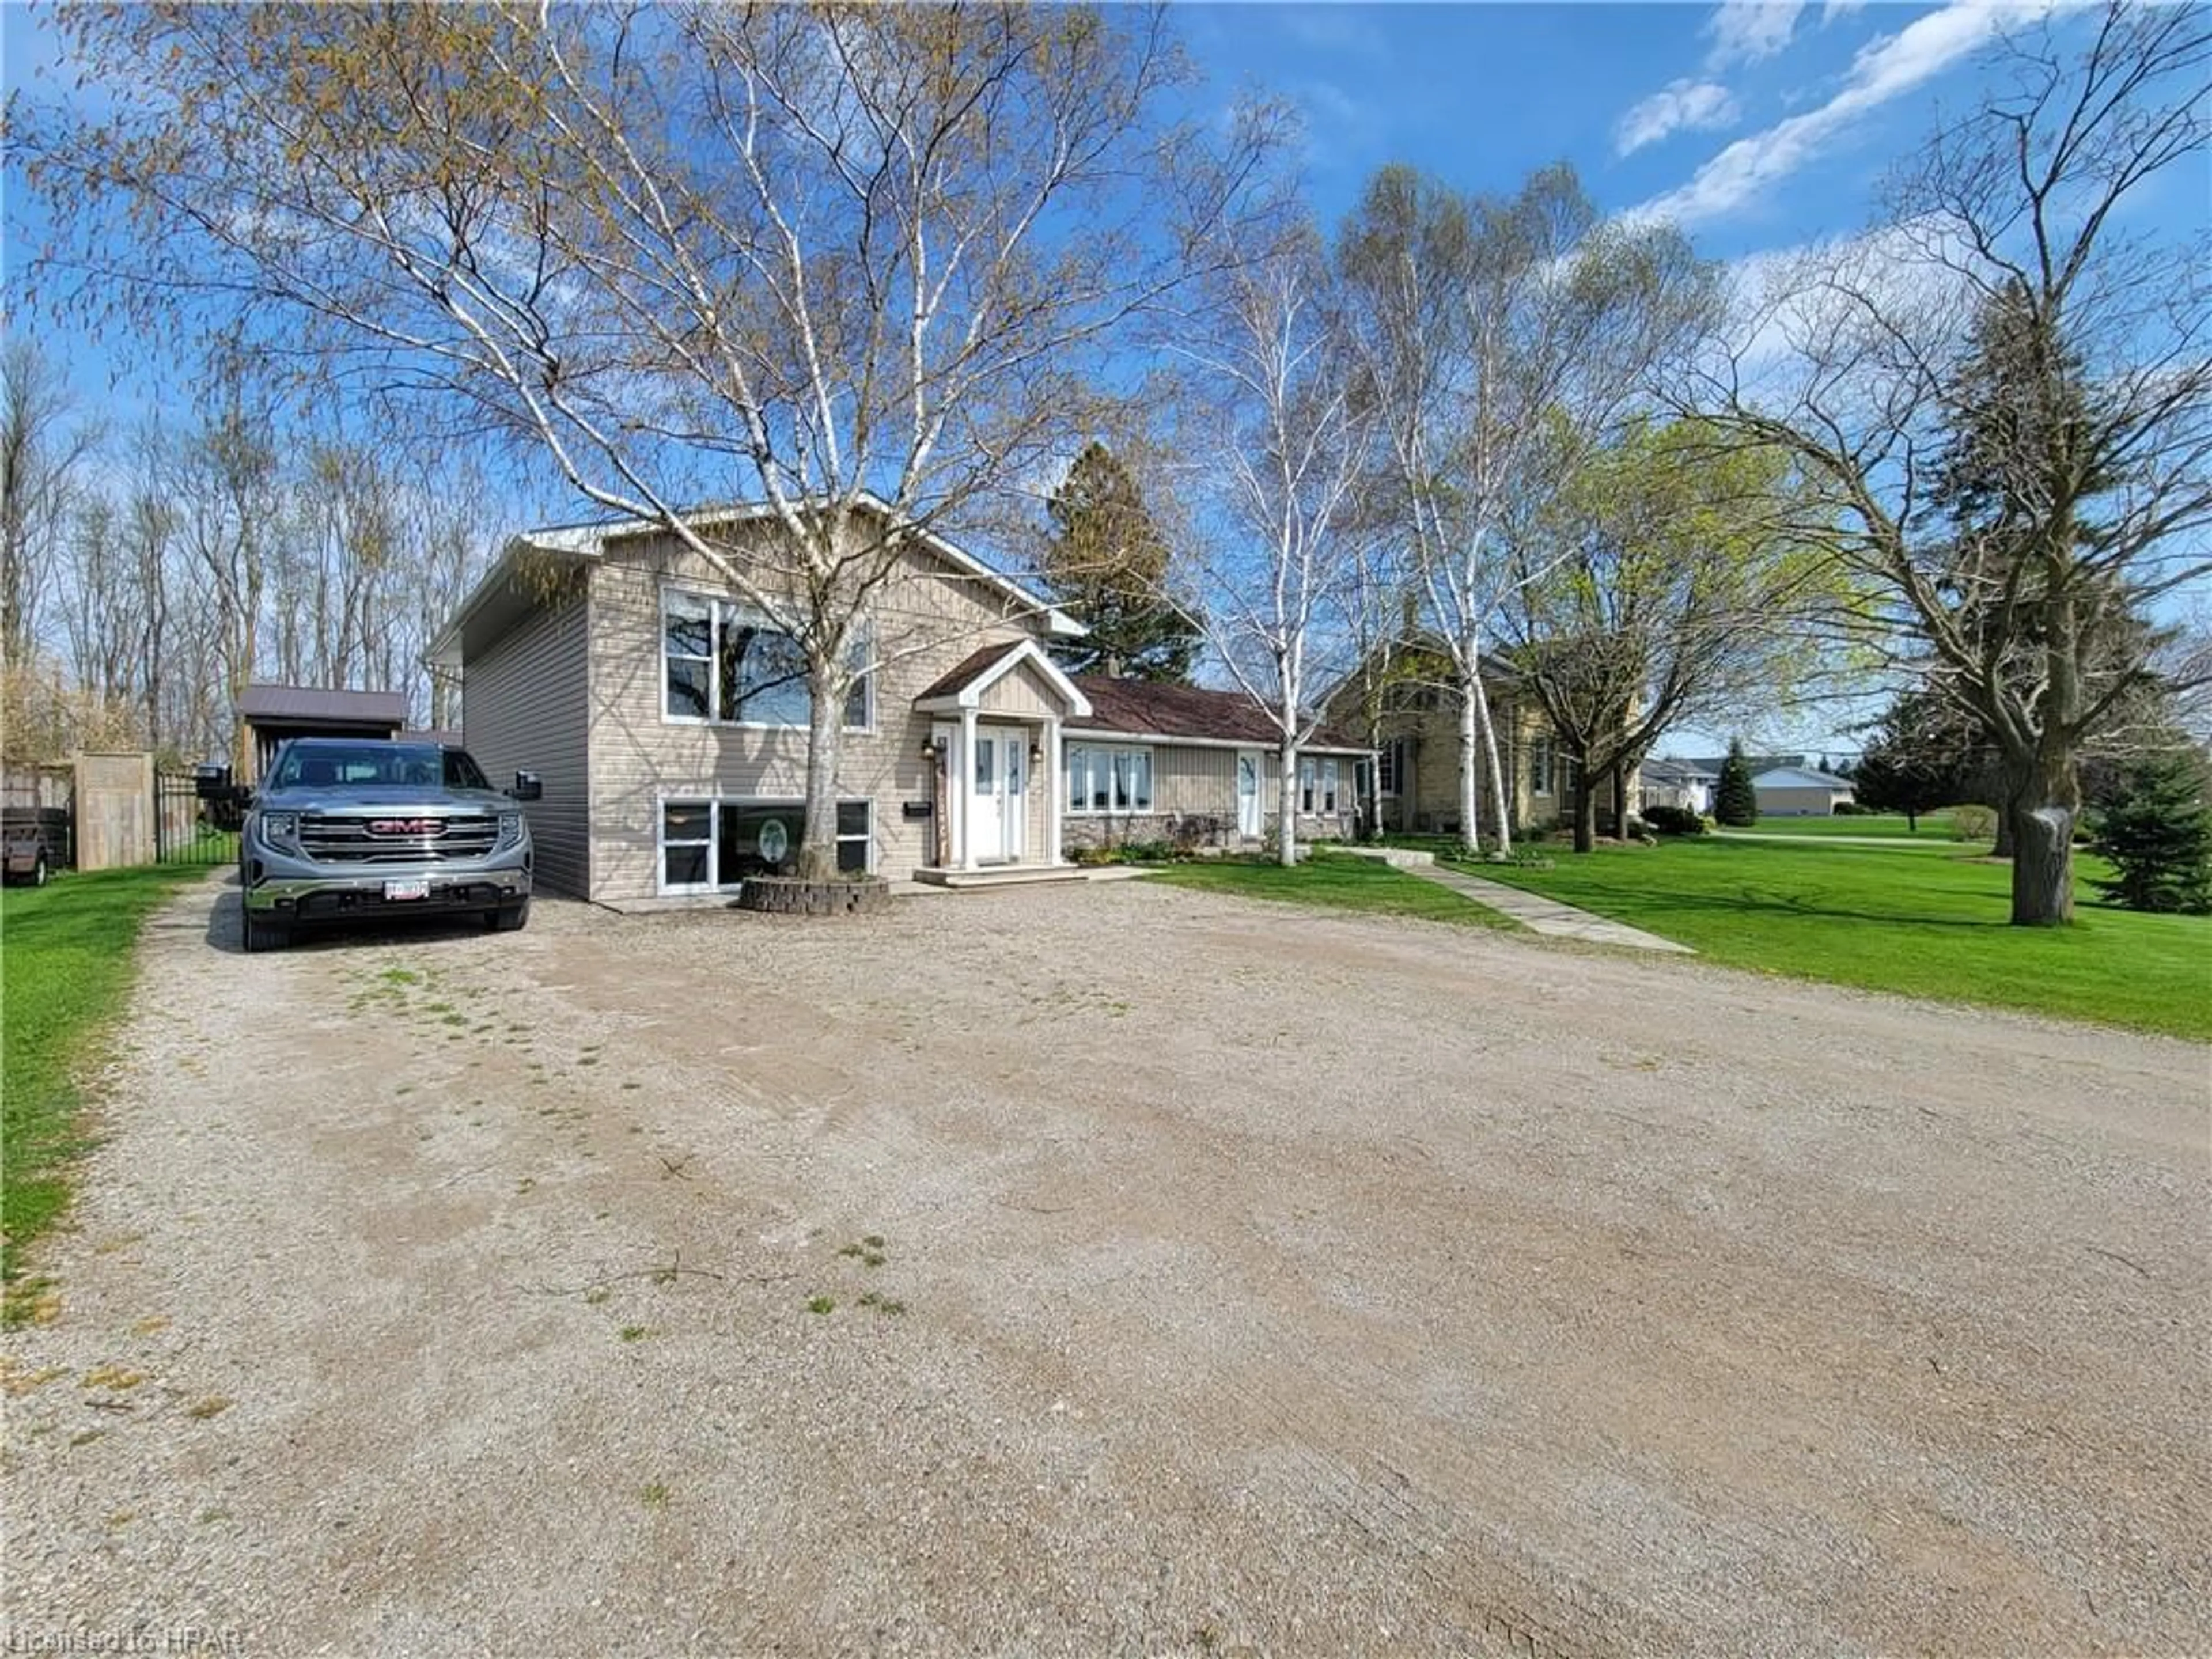 Frontside or backside of a home for 70624 London Rd, South Huron Ontario N0M 1S1